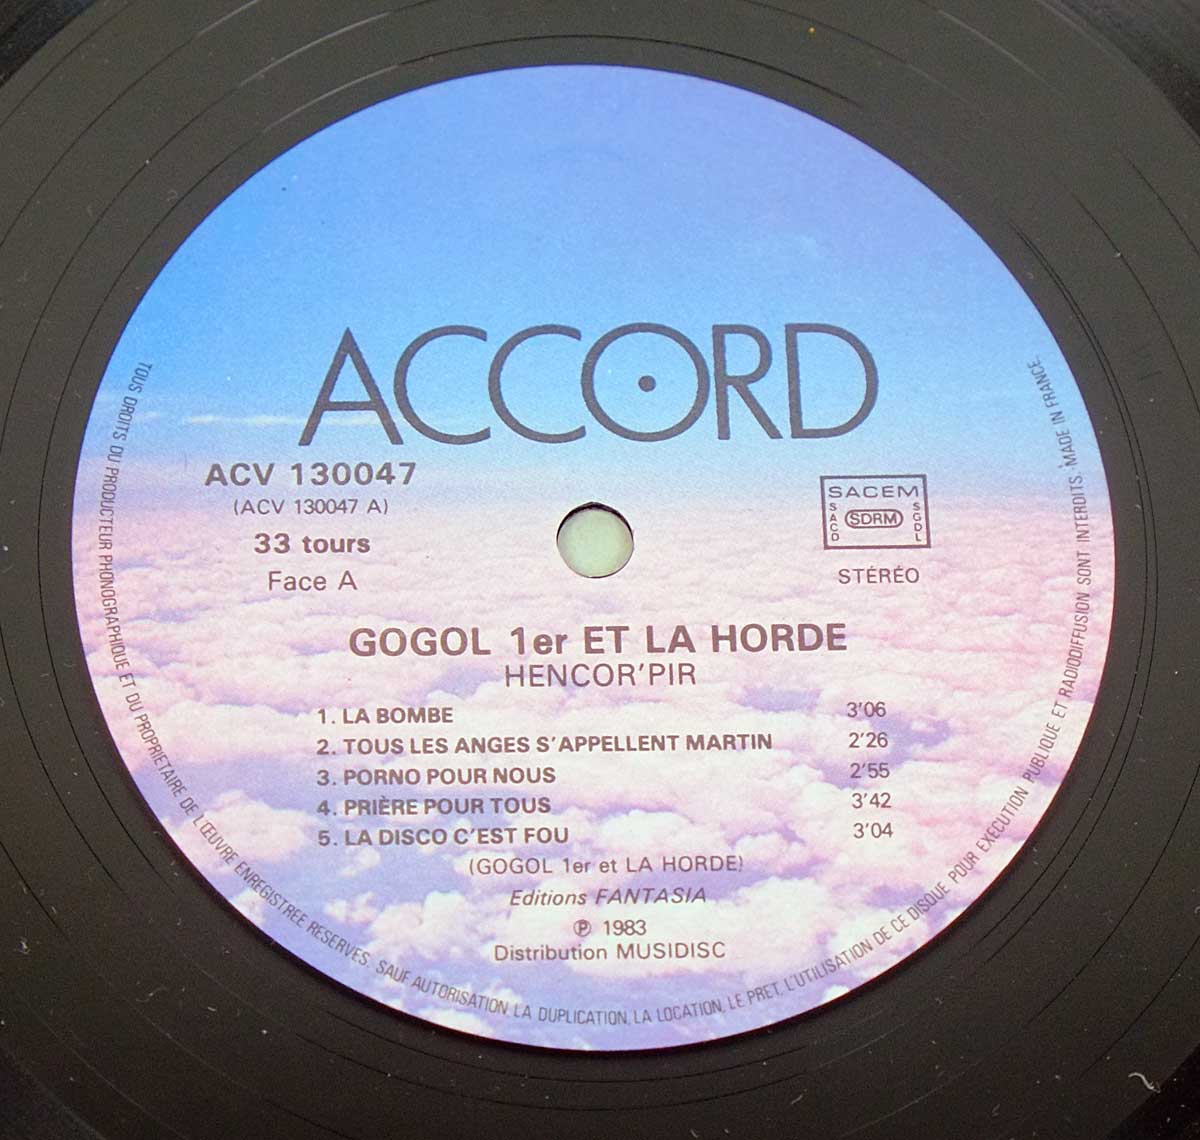 Close-up of the Blue Accord Record Label  